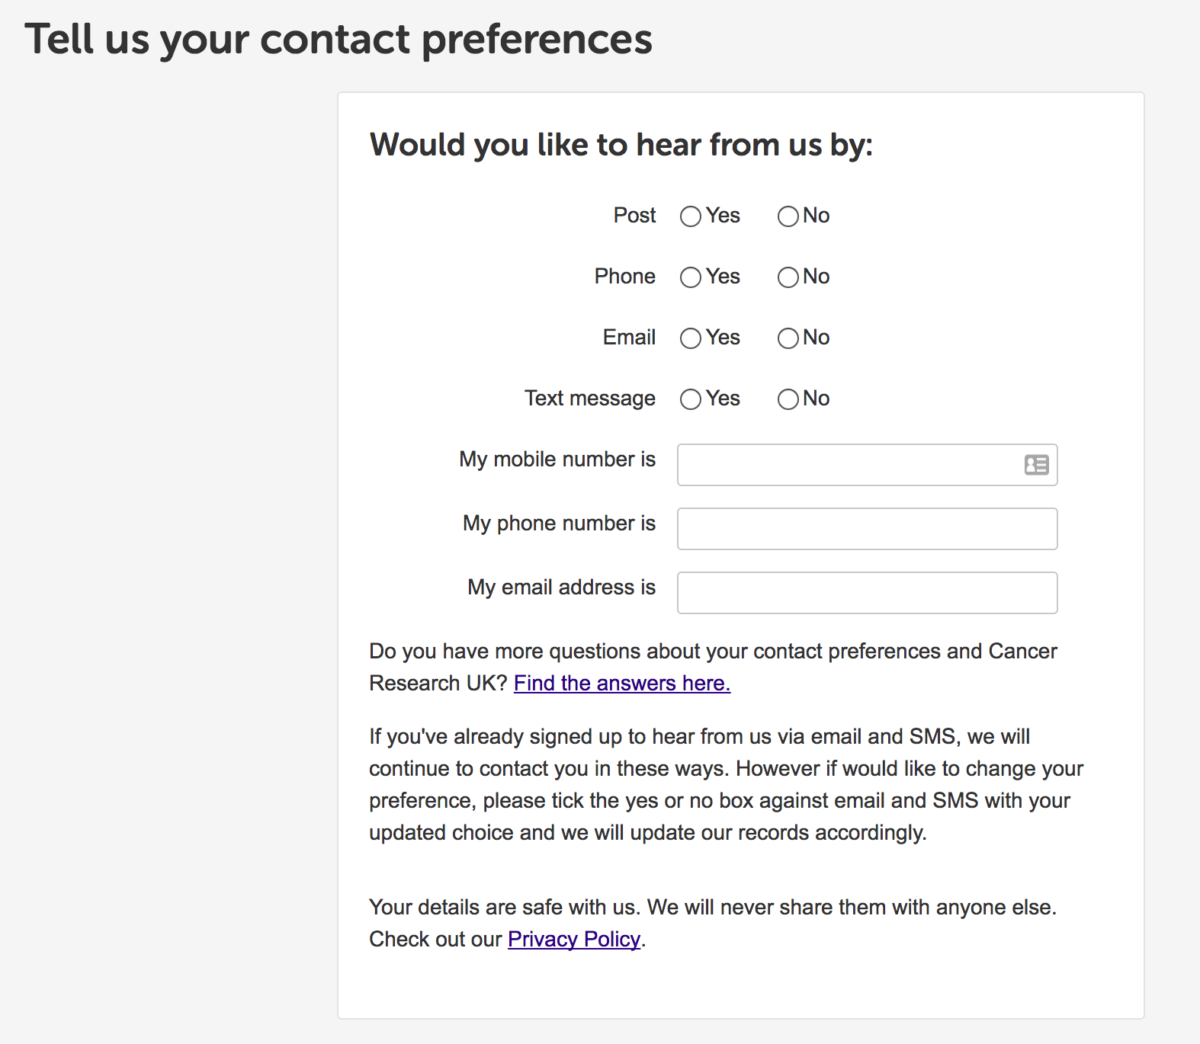 Cancer Research UK's opt-in form preferences